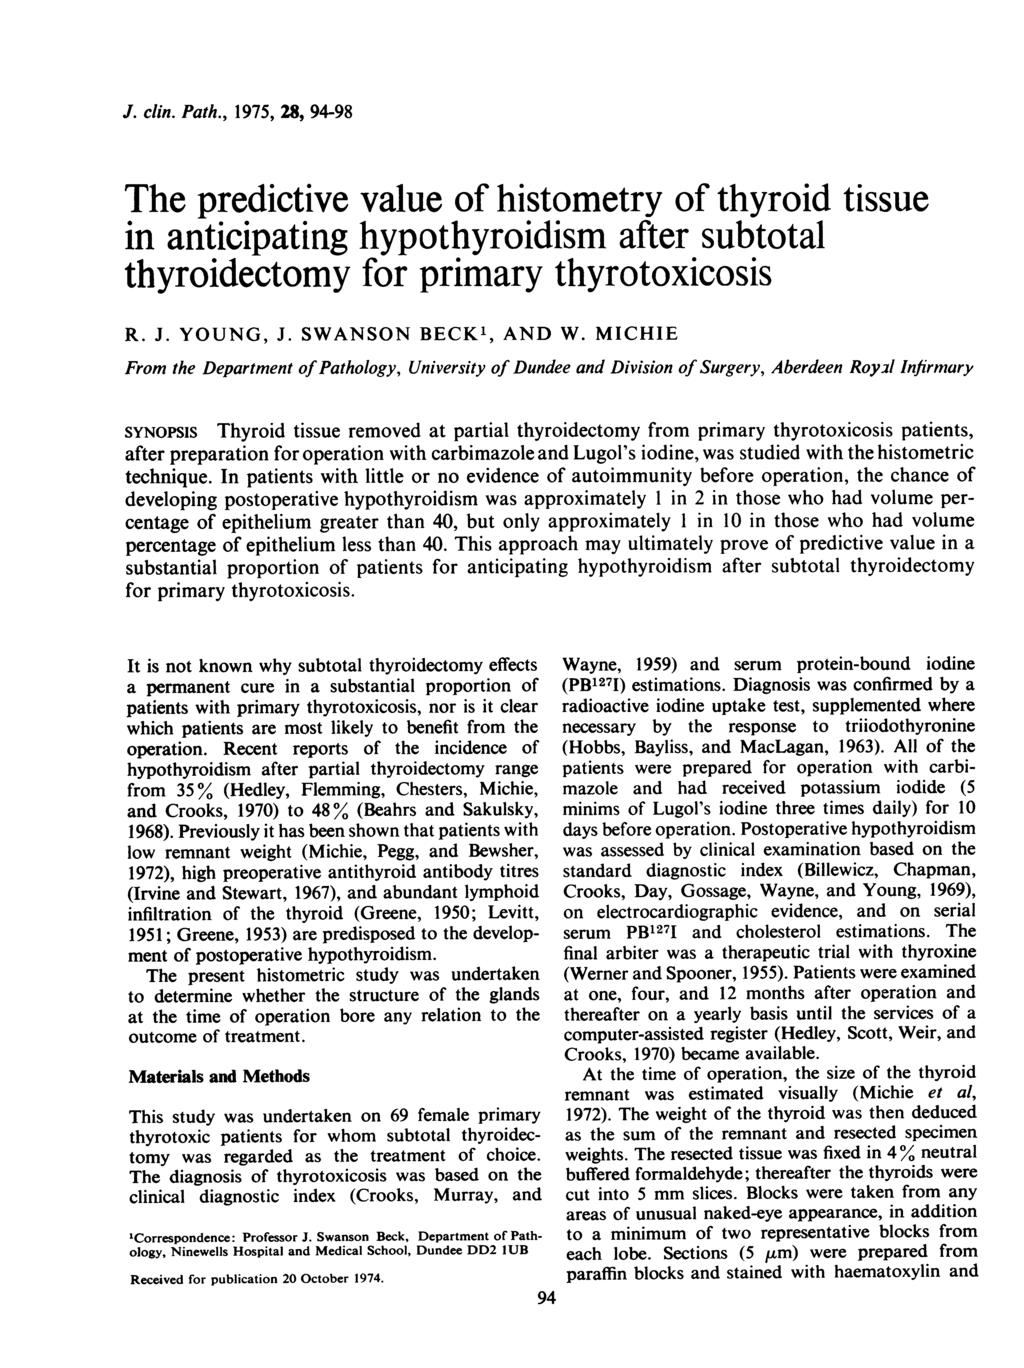 J clin Pth, 1975, 28, 94-98 The predictive vlue of histometry of thyroid tissue in nticipting hypothyroidism fter subtotl thyroidectomy for primry thyrotoxicosis R J YOUNG, J SWNSON BECK', ND W